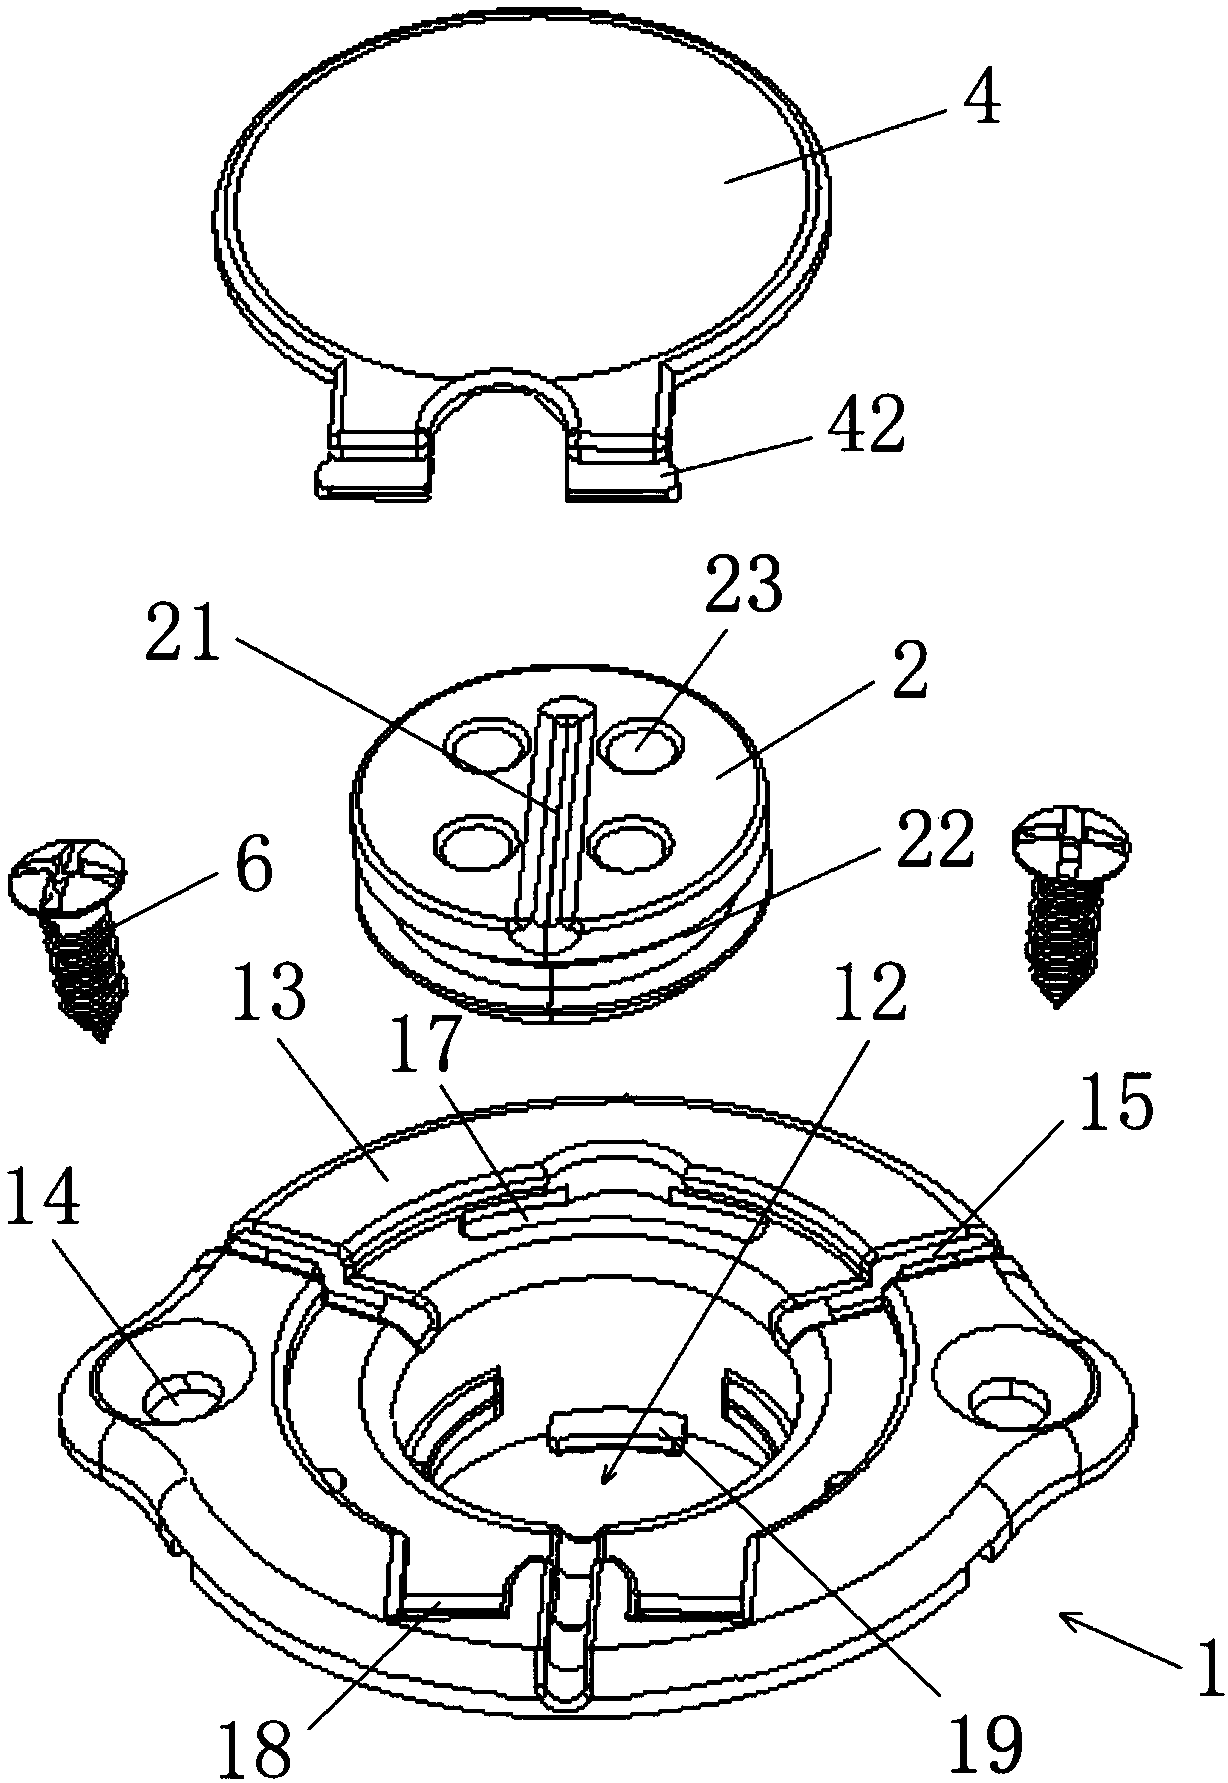 Brain electrode fixation device and suite